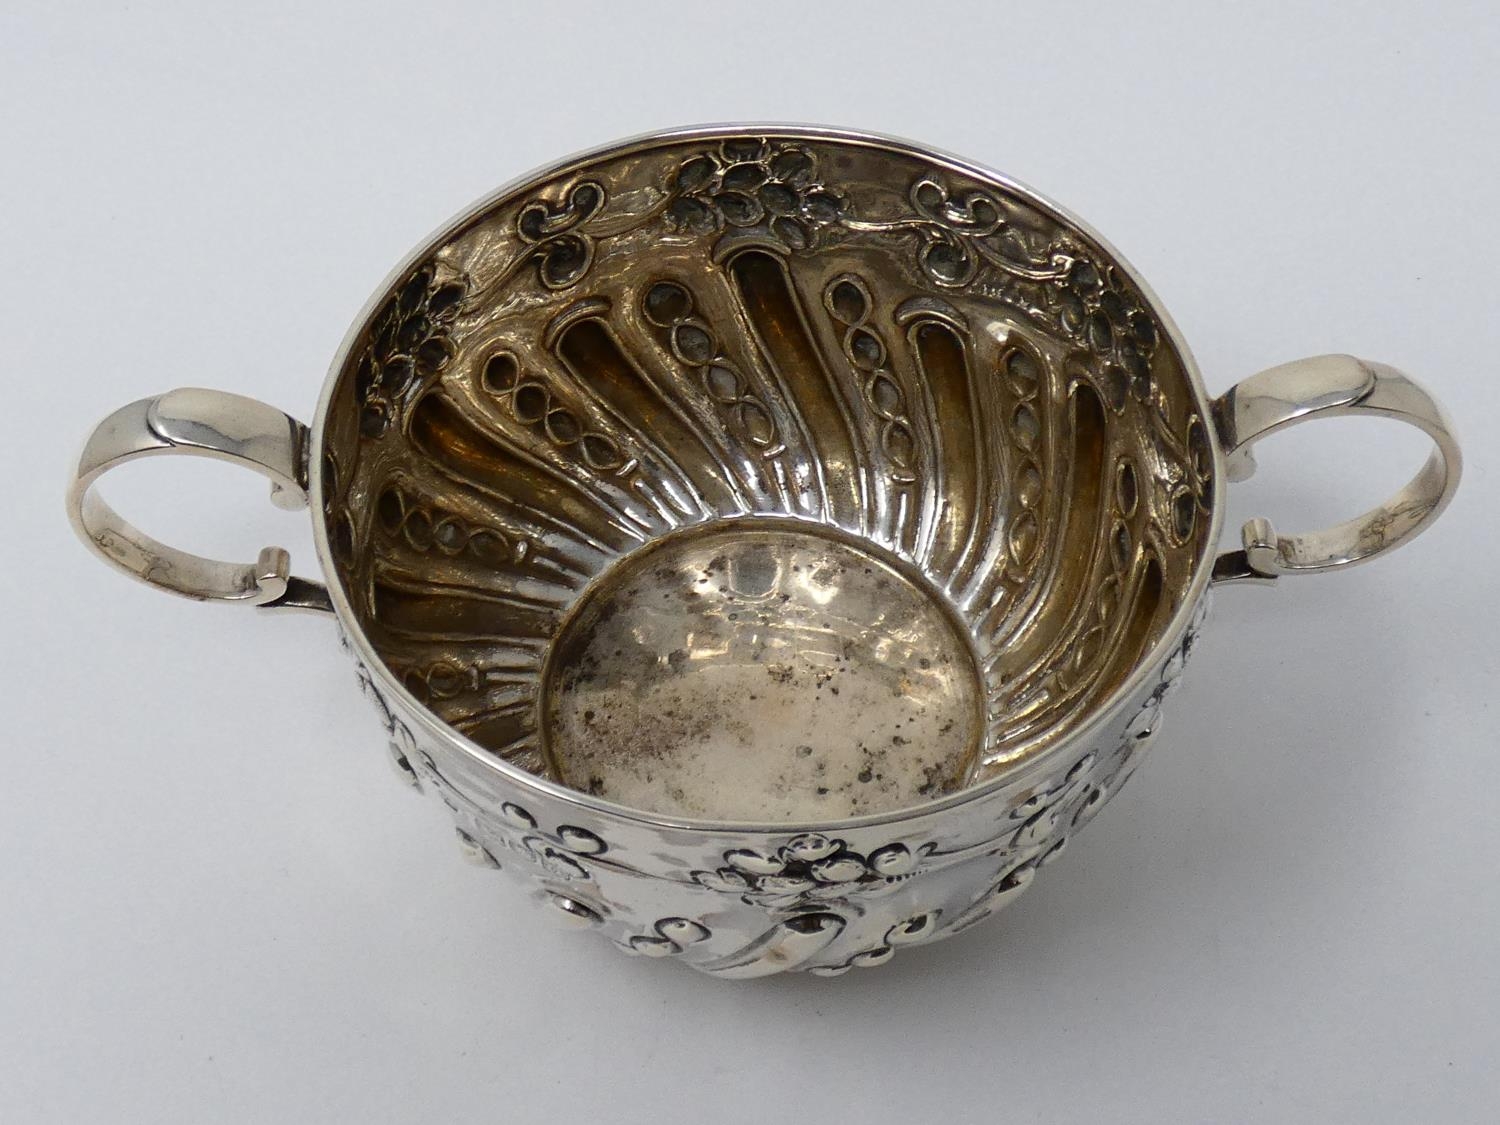 A two handled Victorian repousse design silver porriger with floral design and scrolling handles. - Image 3 of 6